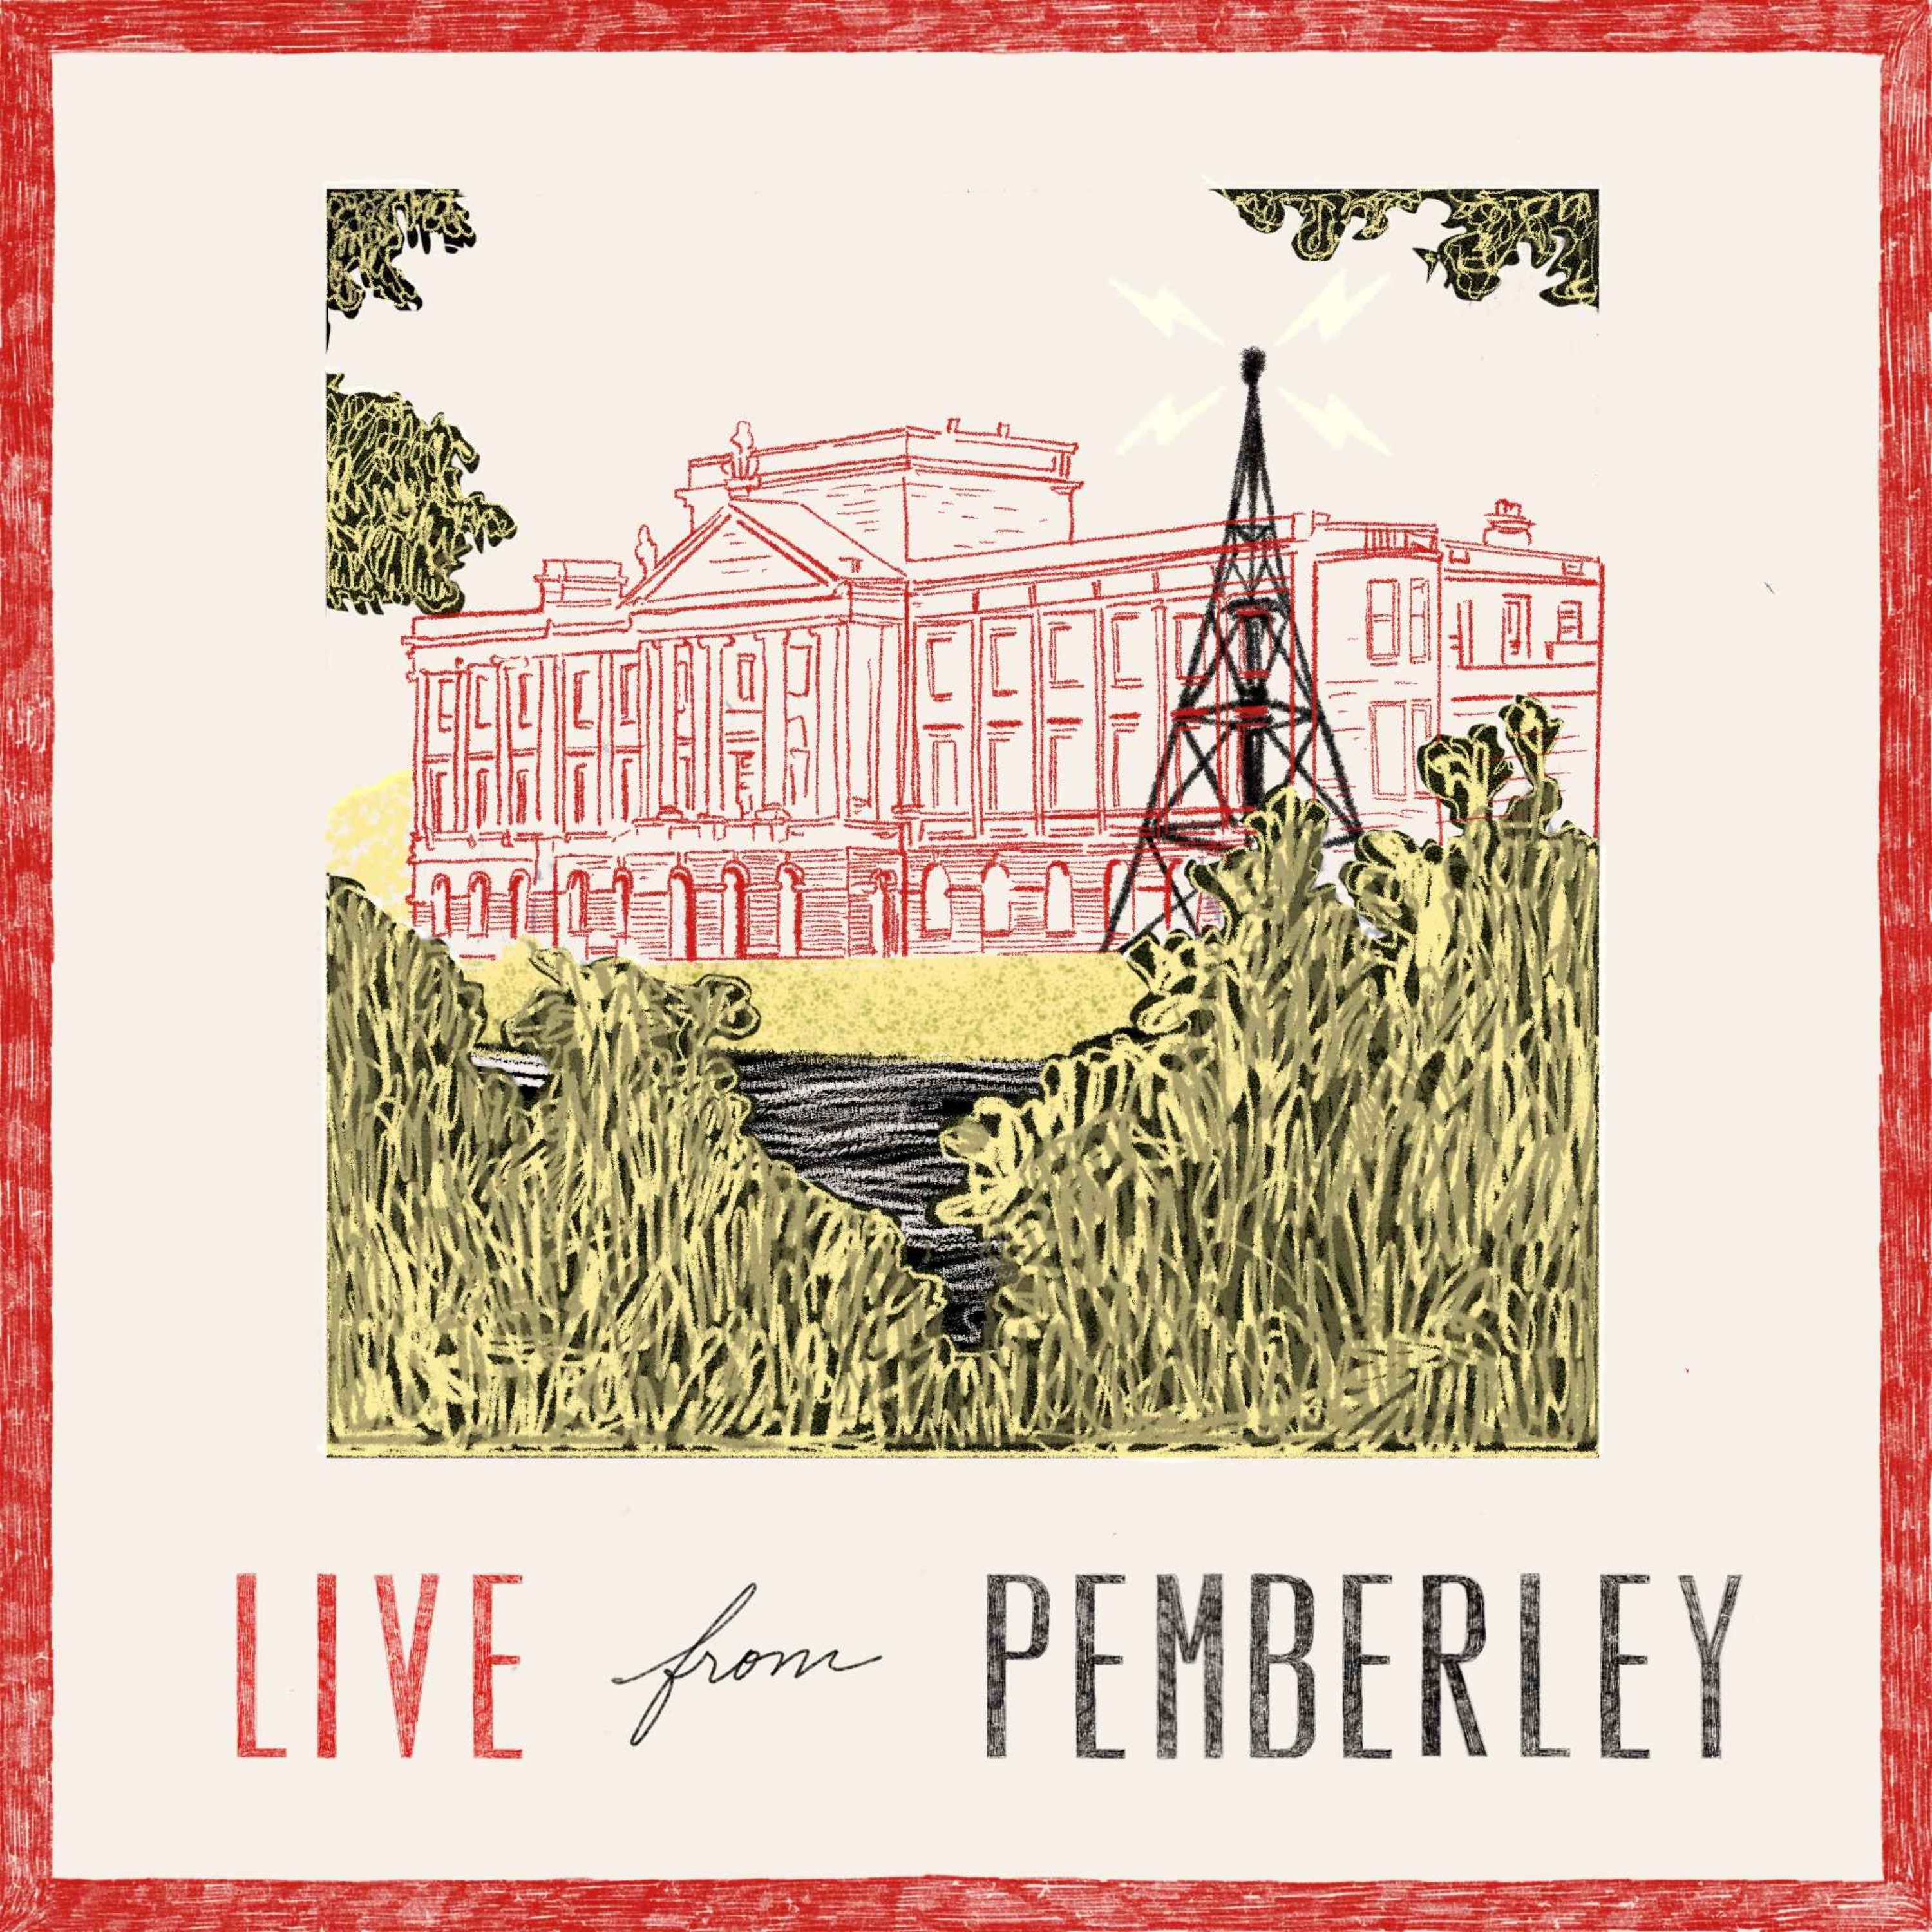 Live from Pemberley: Fire Island (with Joel Kim Booster)